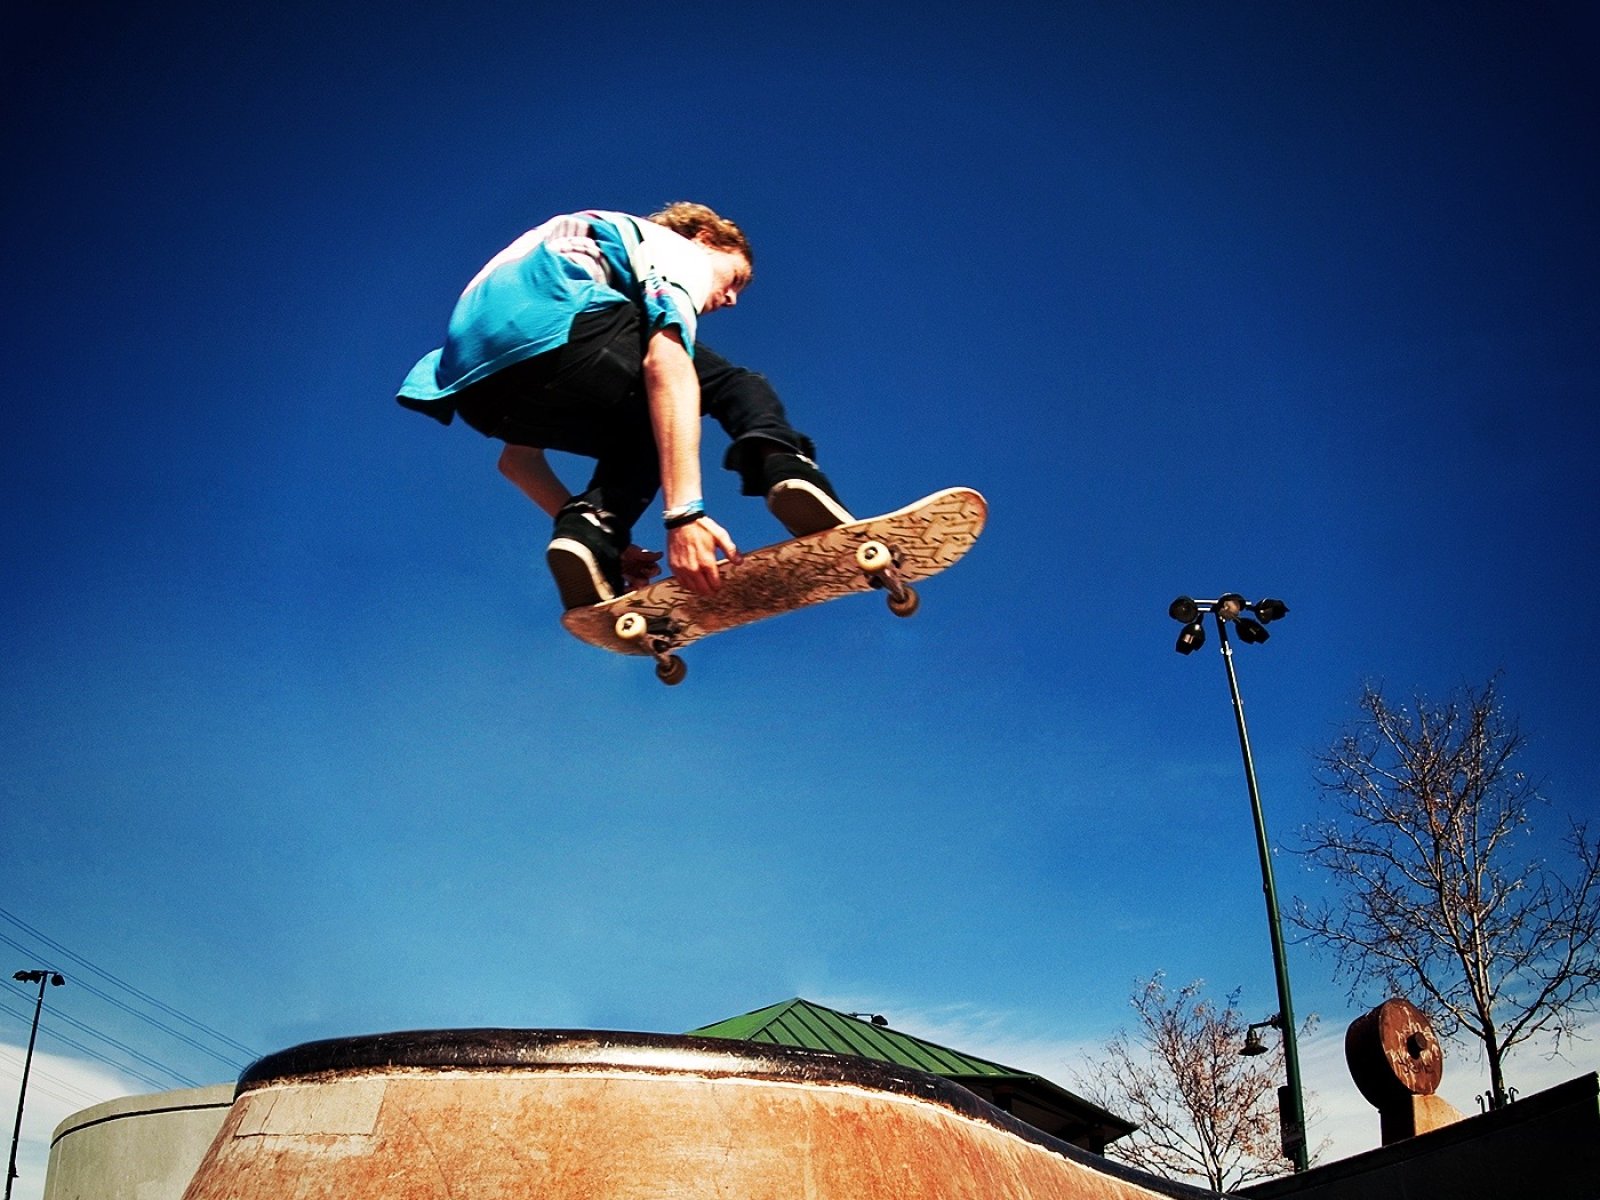 Low angle view of man jumping with skateboard at skate ramp against blue sky